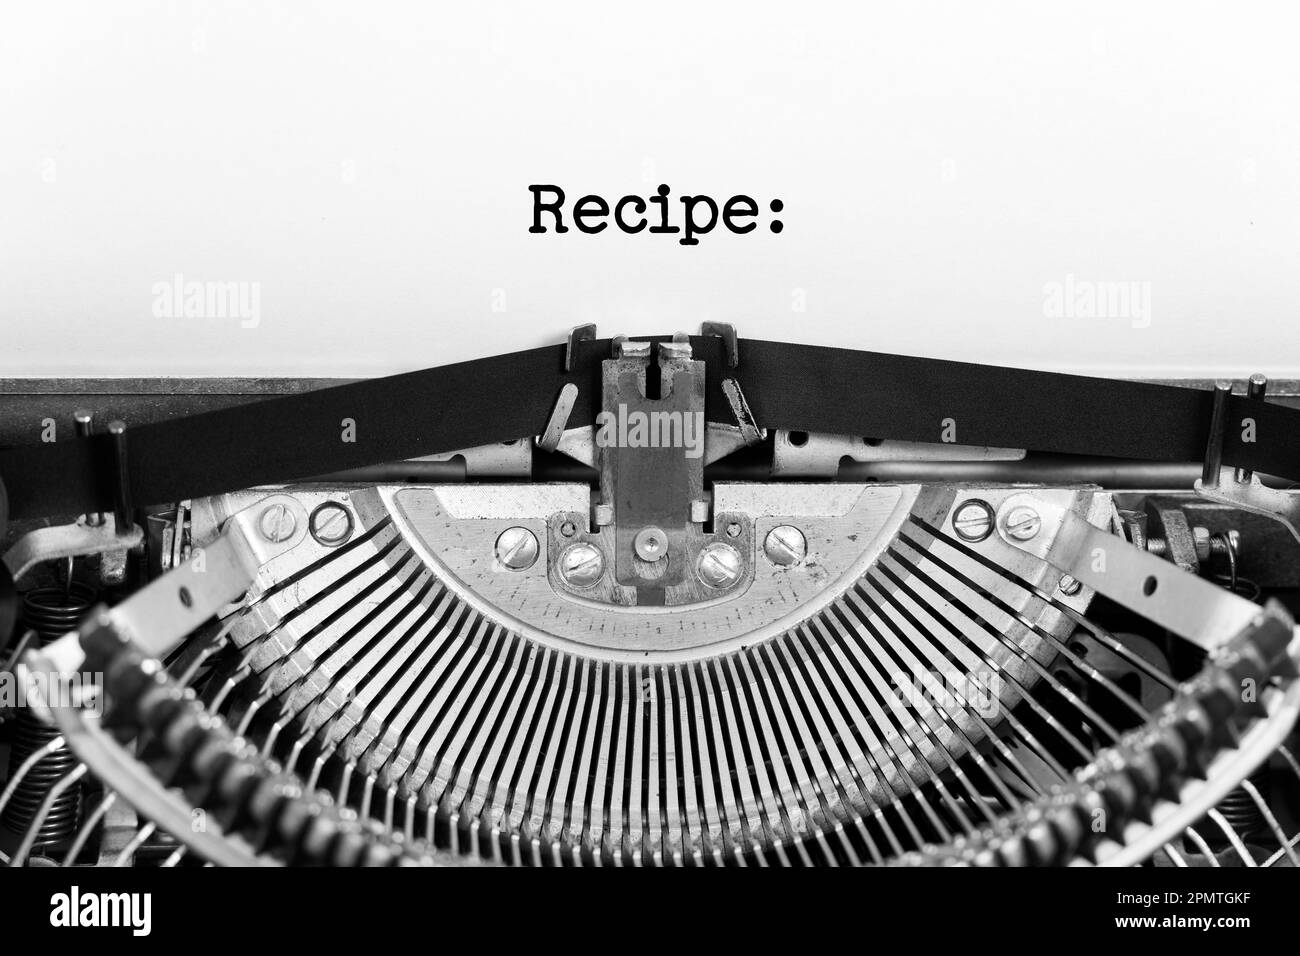 Recipe word closeup being typing and centered on a sheet of paper on old vintage typewriter mechanical Stock Photo